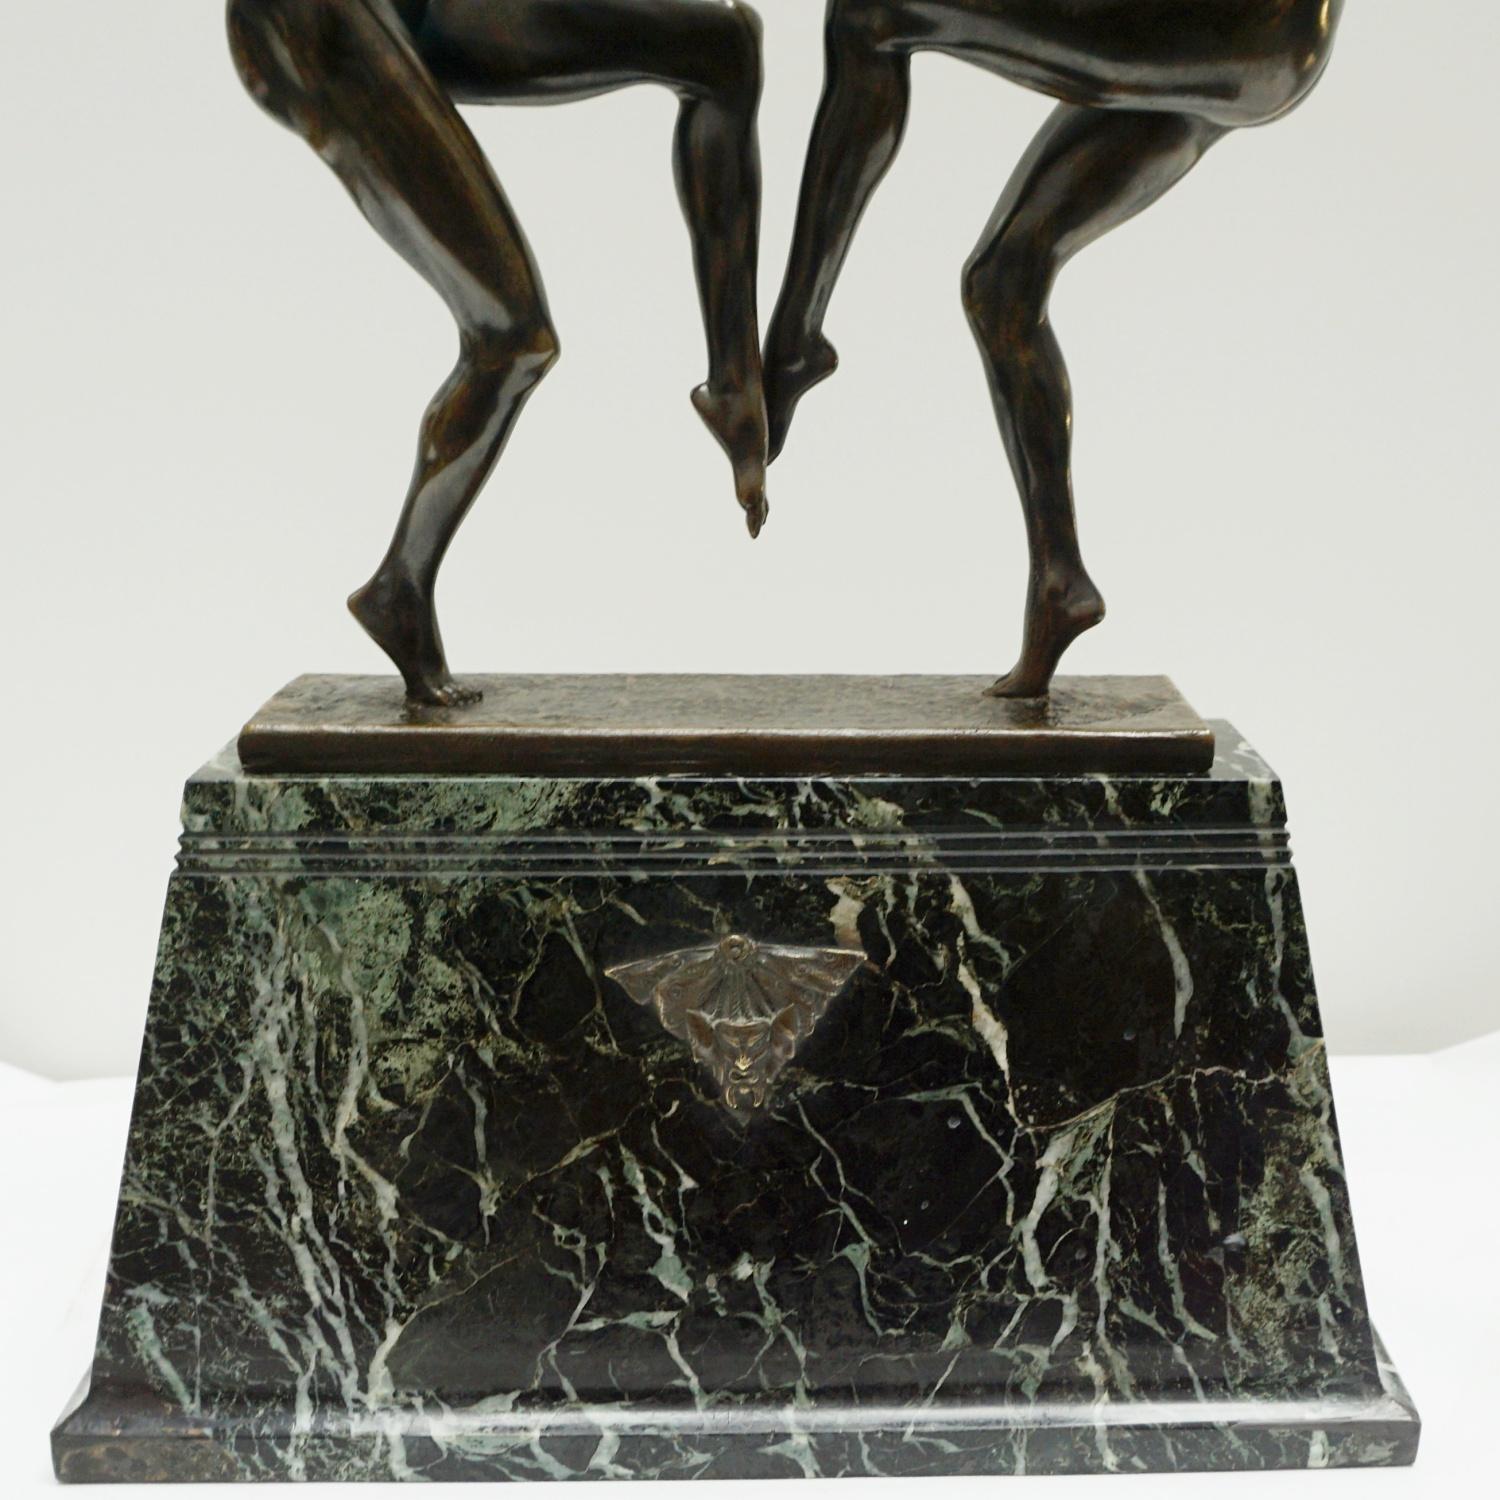 Original Art Deco Bronze and Marble Sculpture, French, C1920 For Sale 4